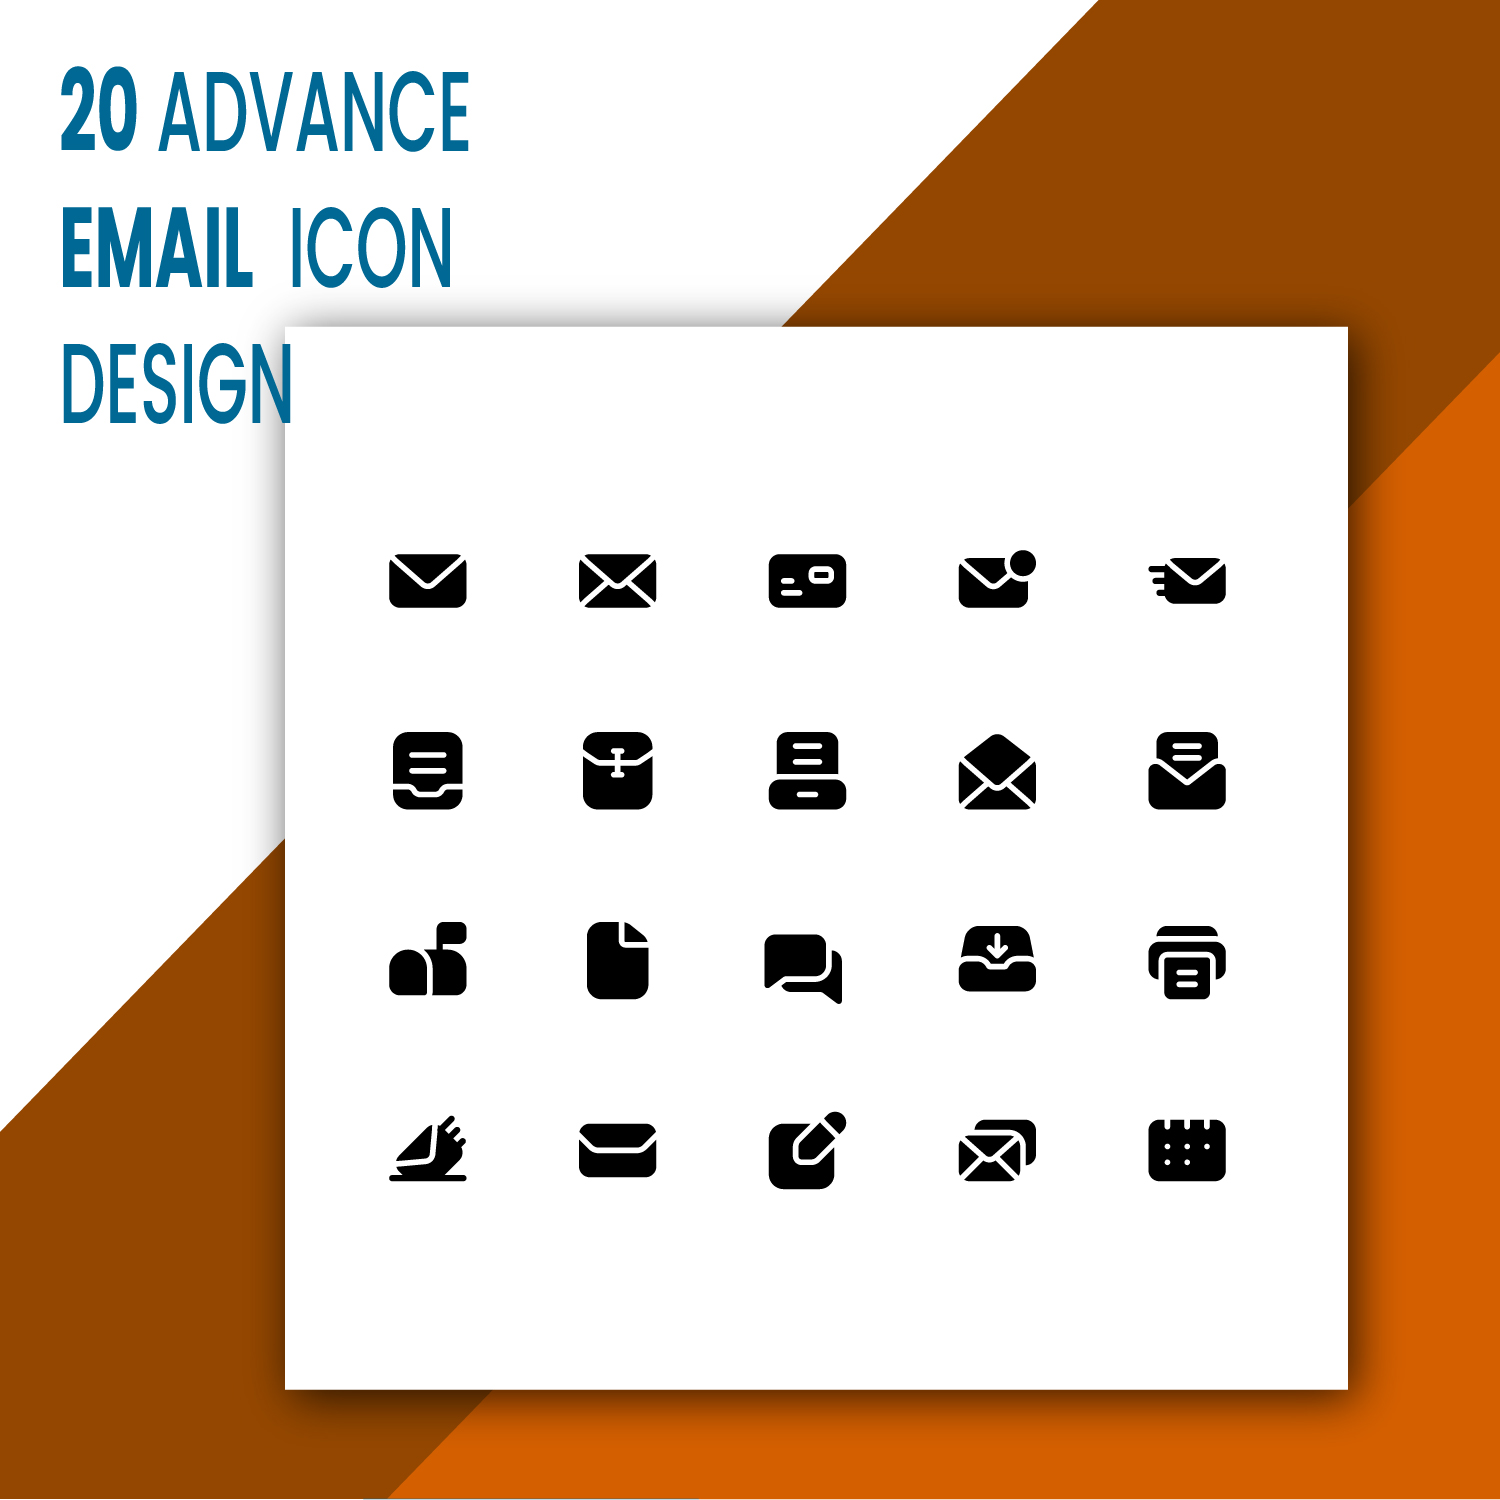 Advance email icons design collection.